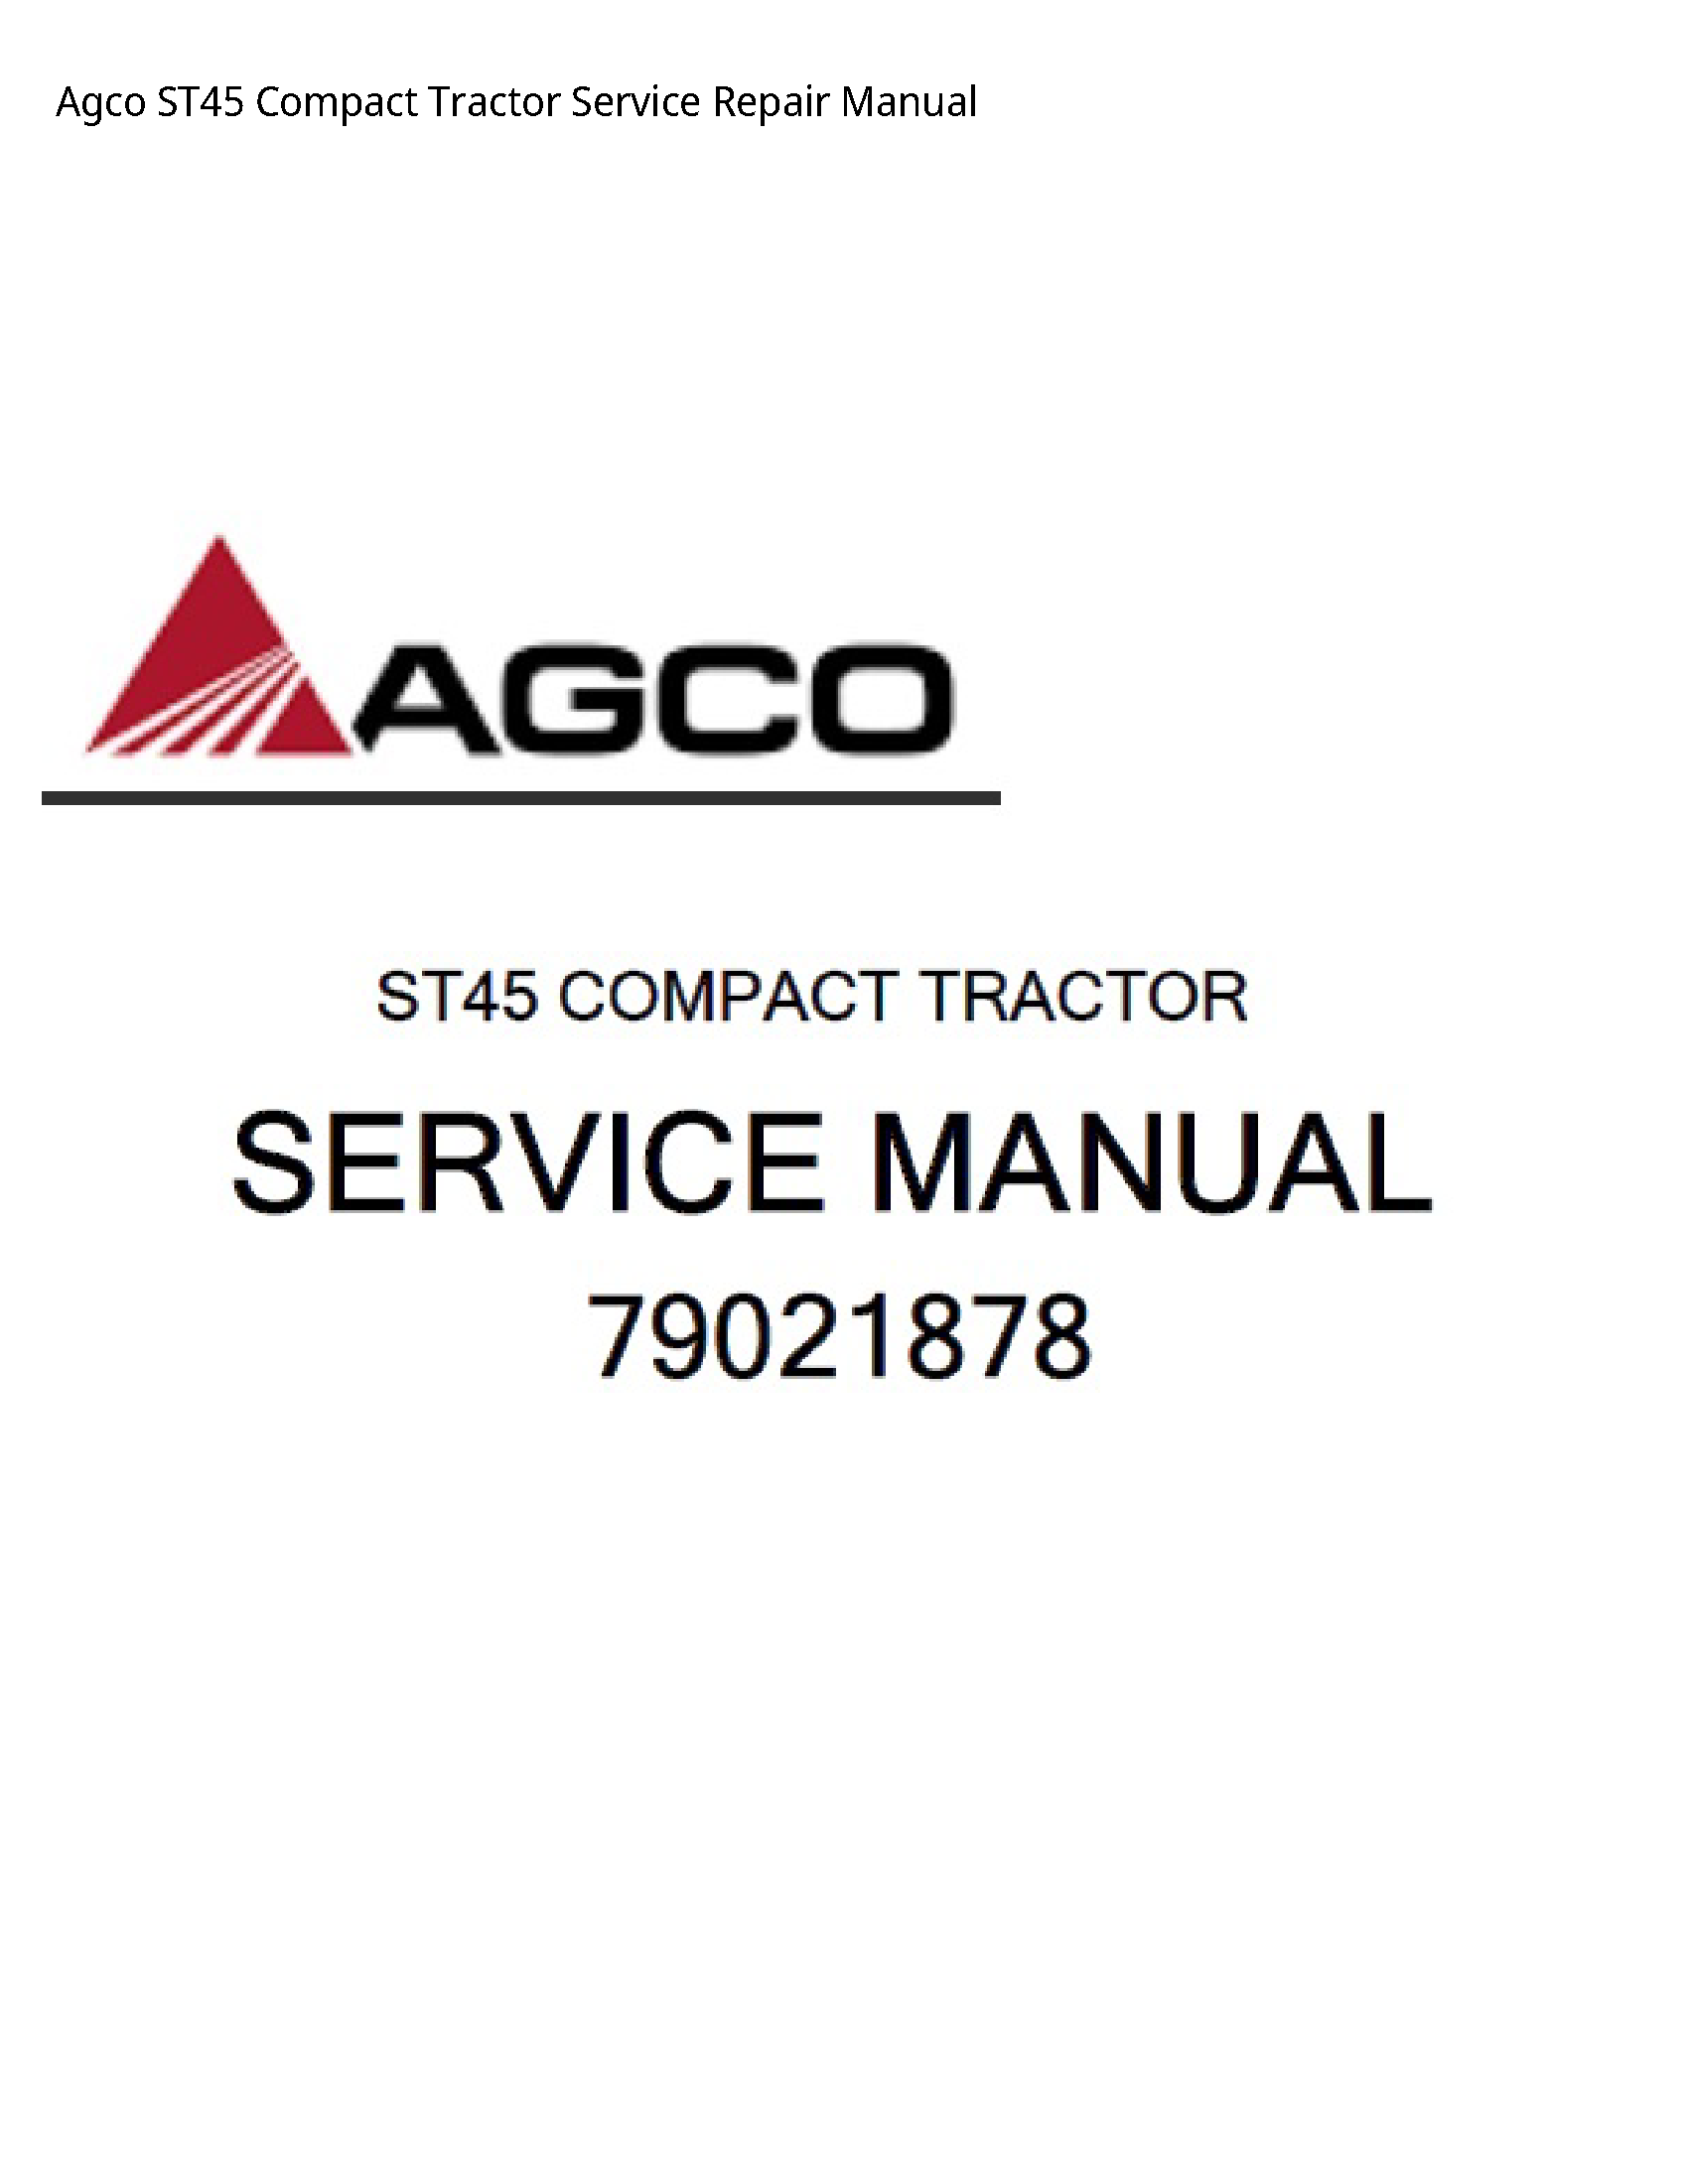 AGCO ST45 Compact Tractor manual